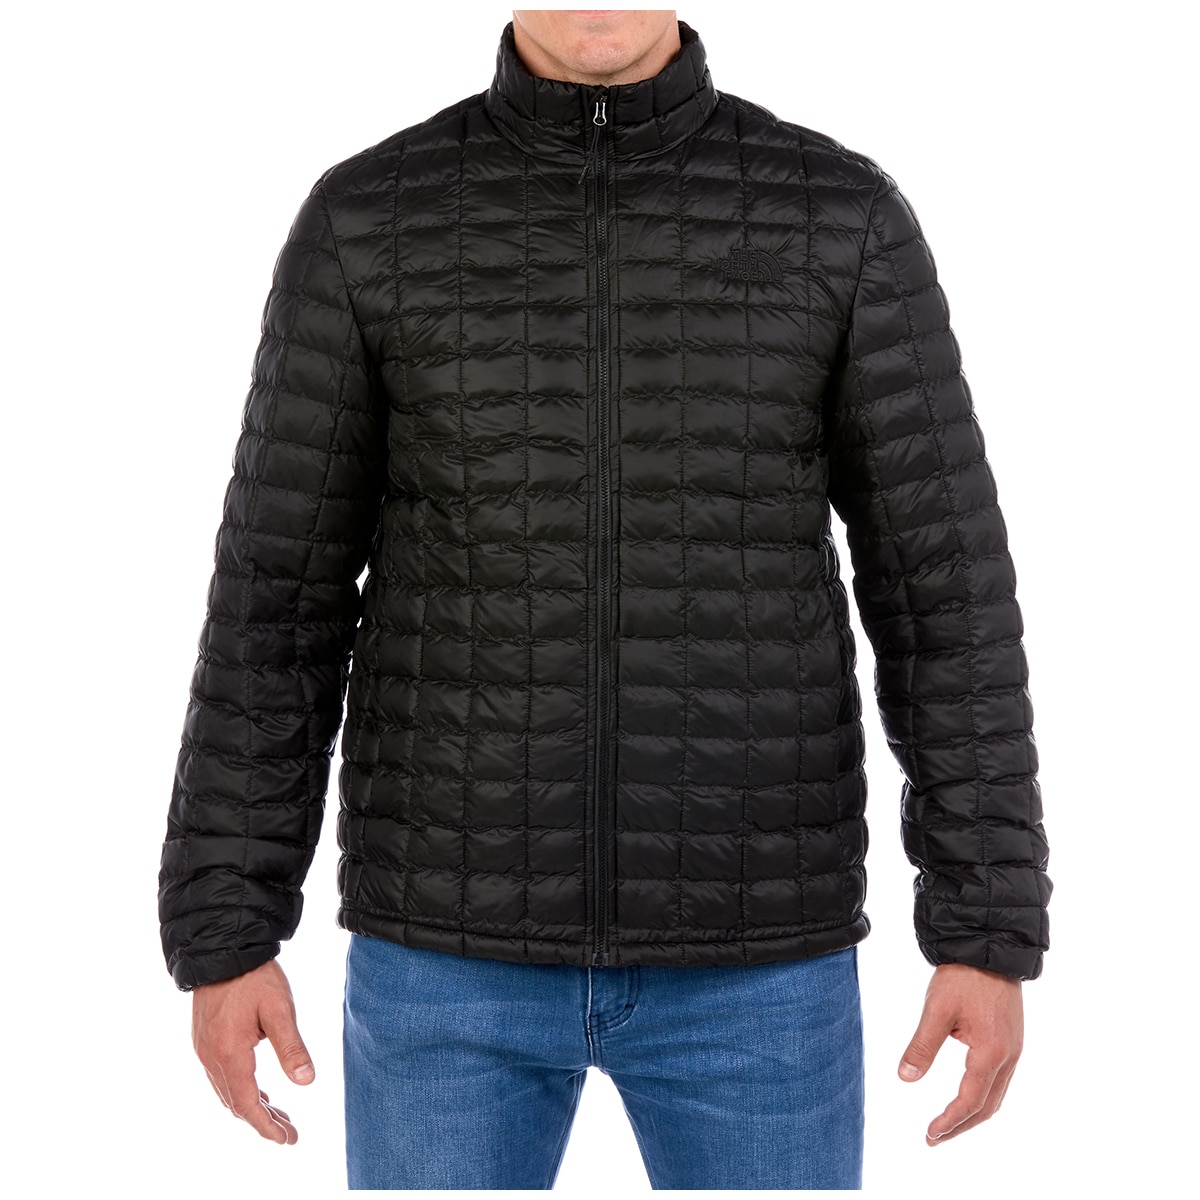 costco thermoball jacket